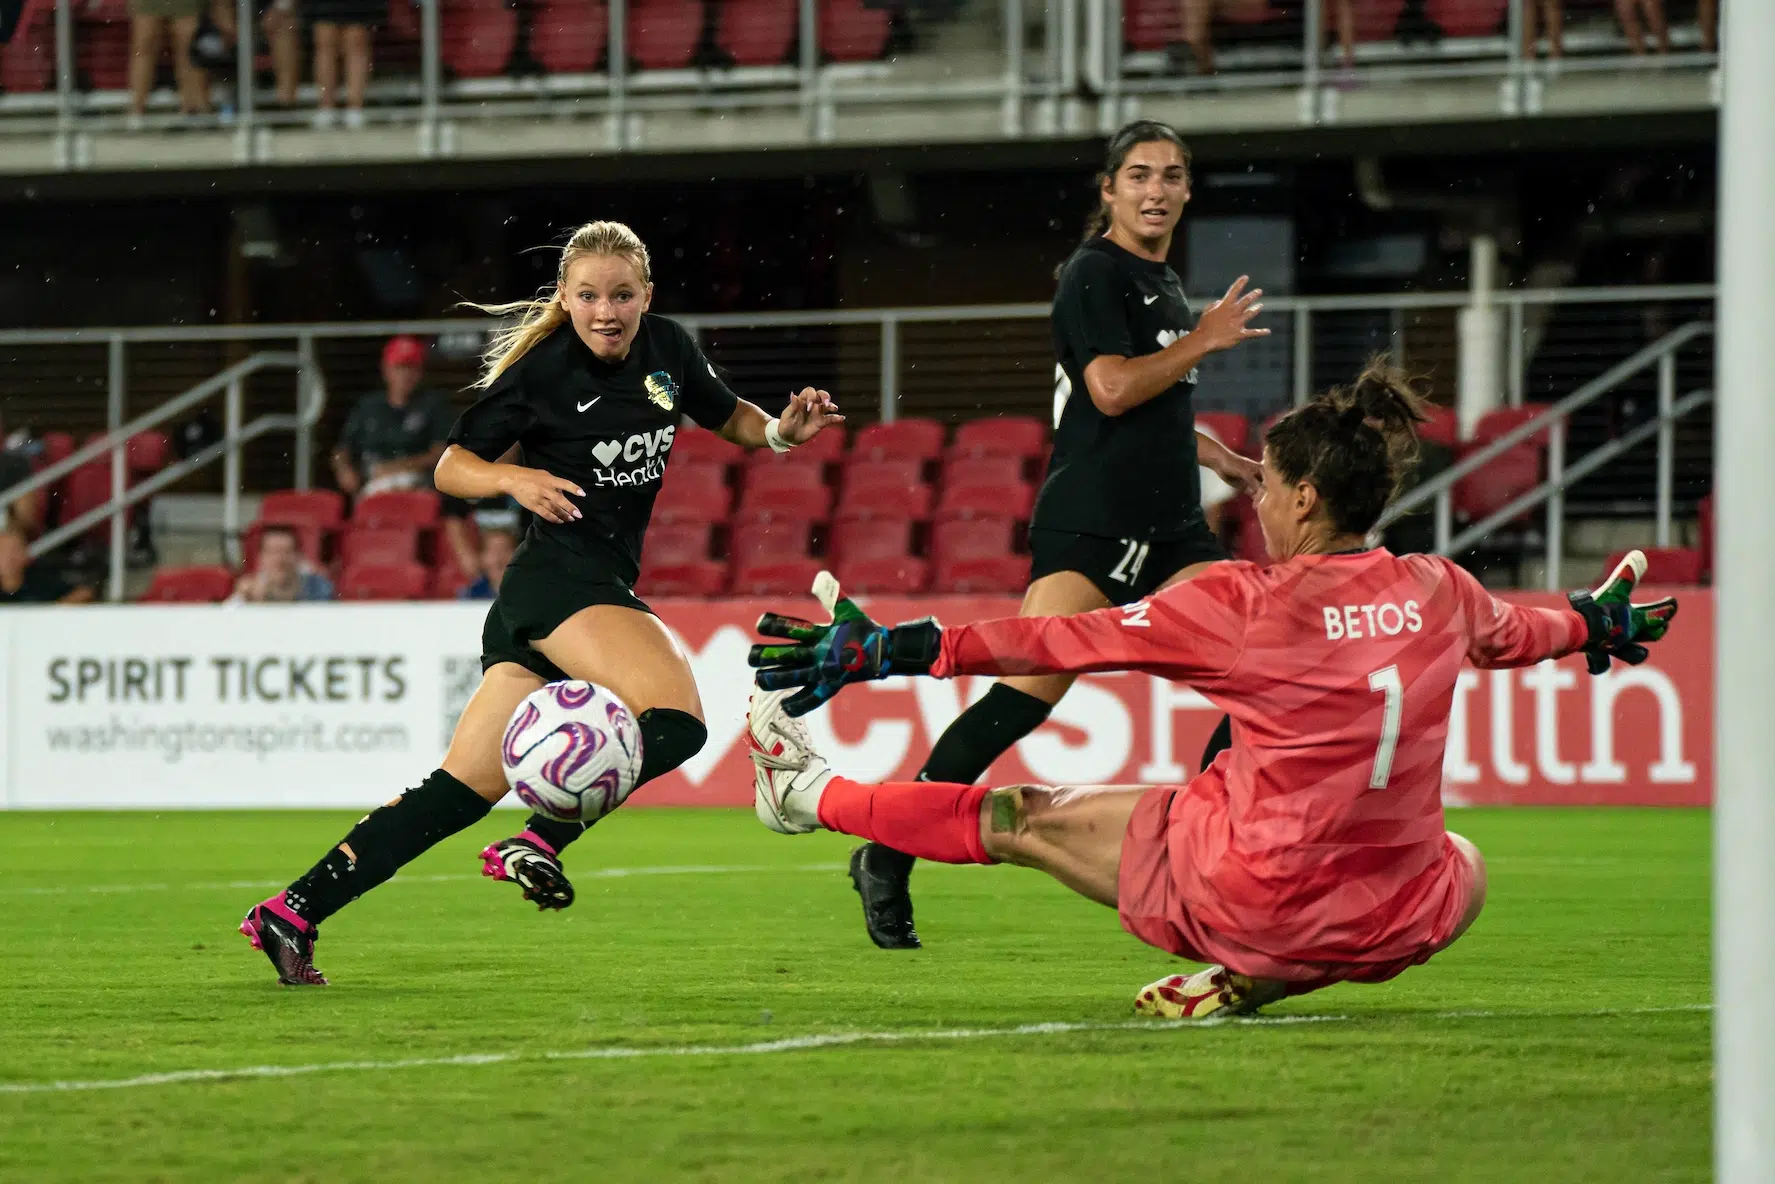 Chloe Ricketts in a black uniform watches the soccer ball she just shot as a goalie in a red uniform attempts to save it.